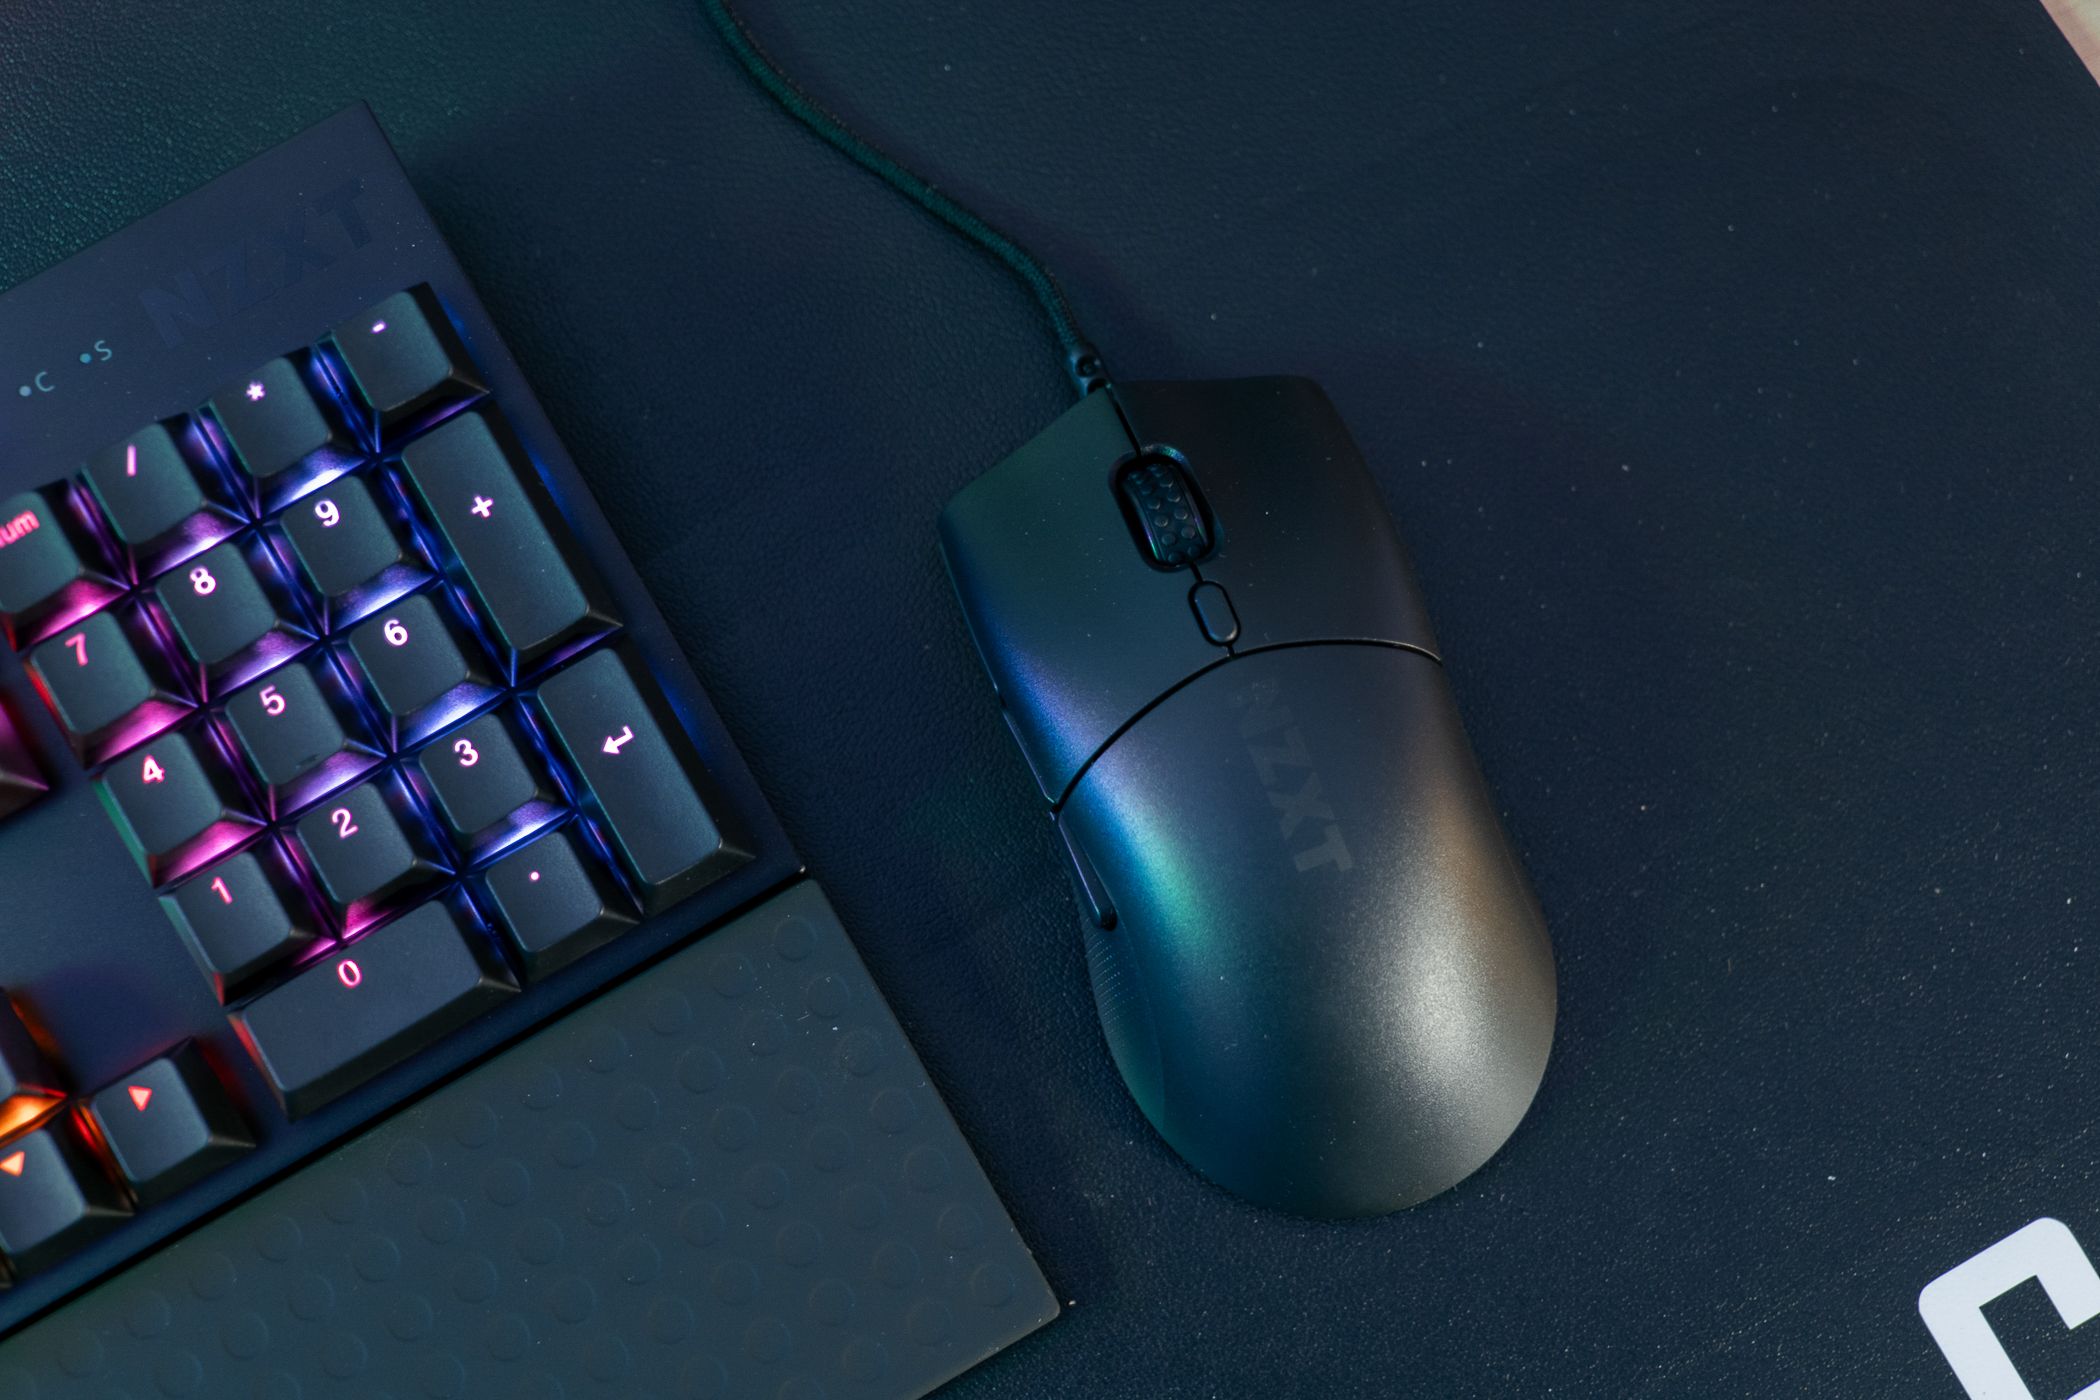 The NZXT Lift 2 Symm mouse on a desk.